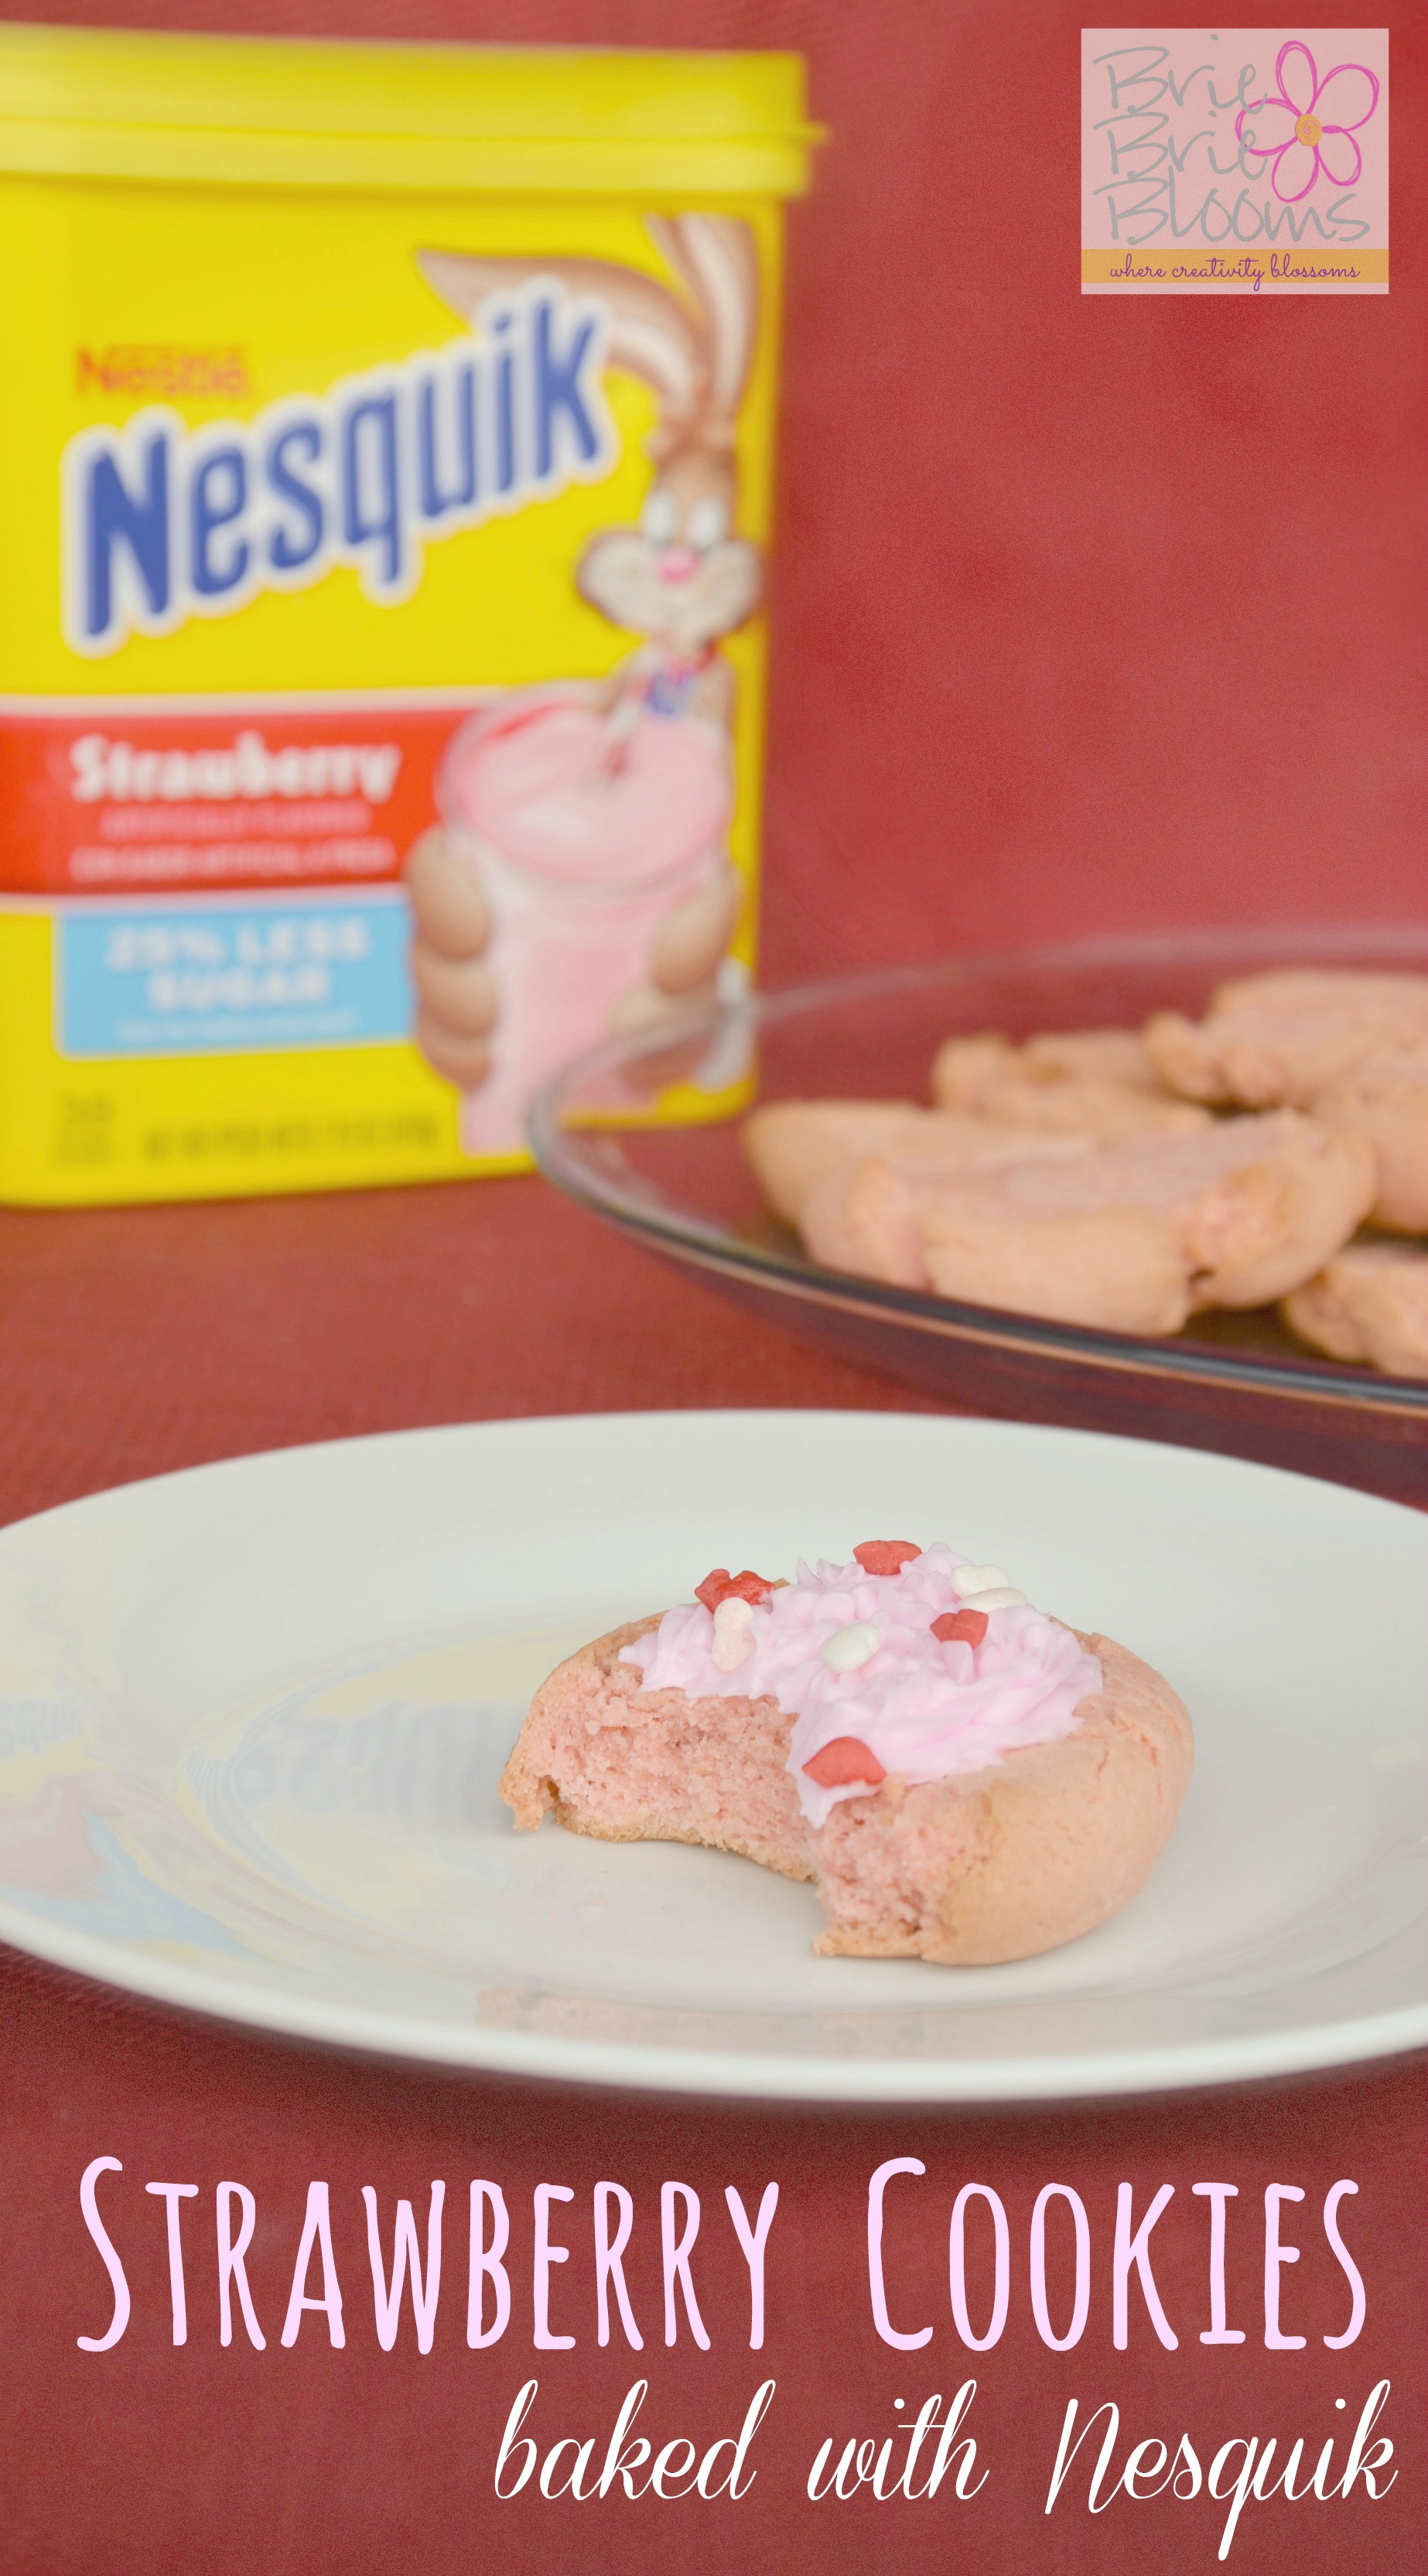 Strawberry Cookies baked with Nesquik